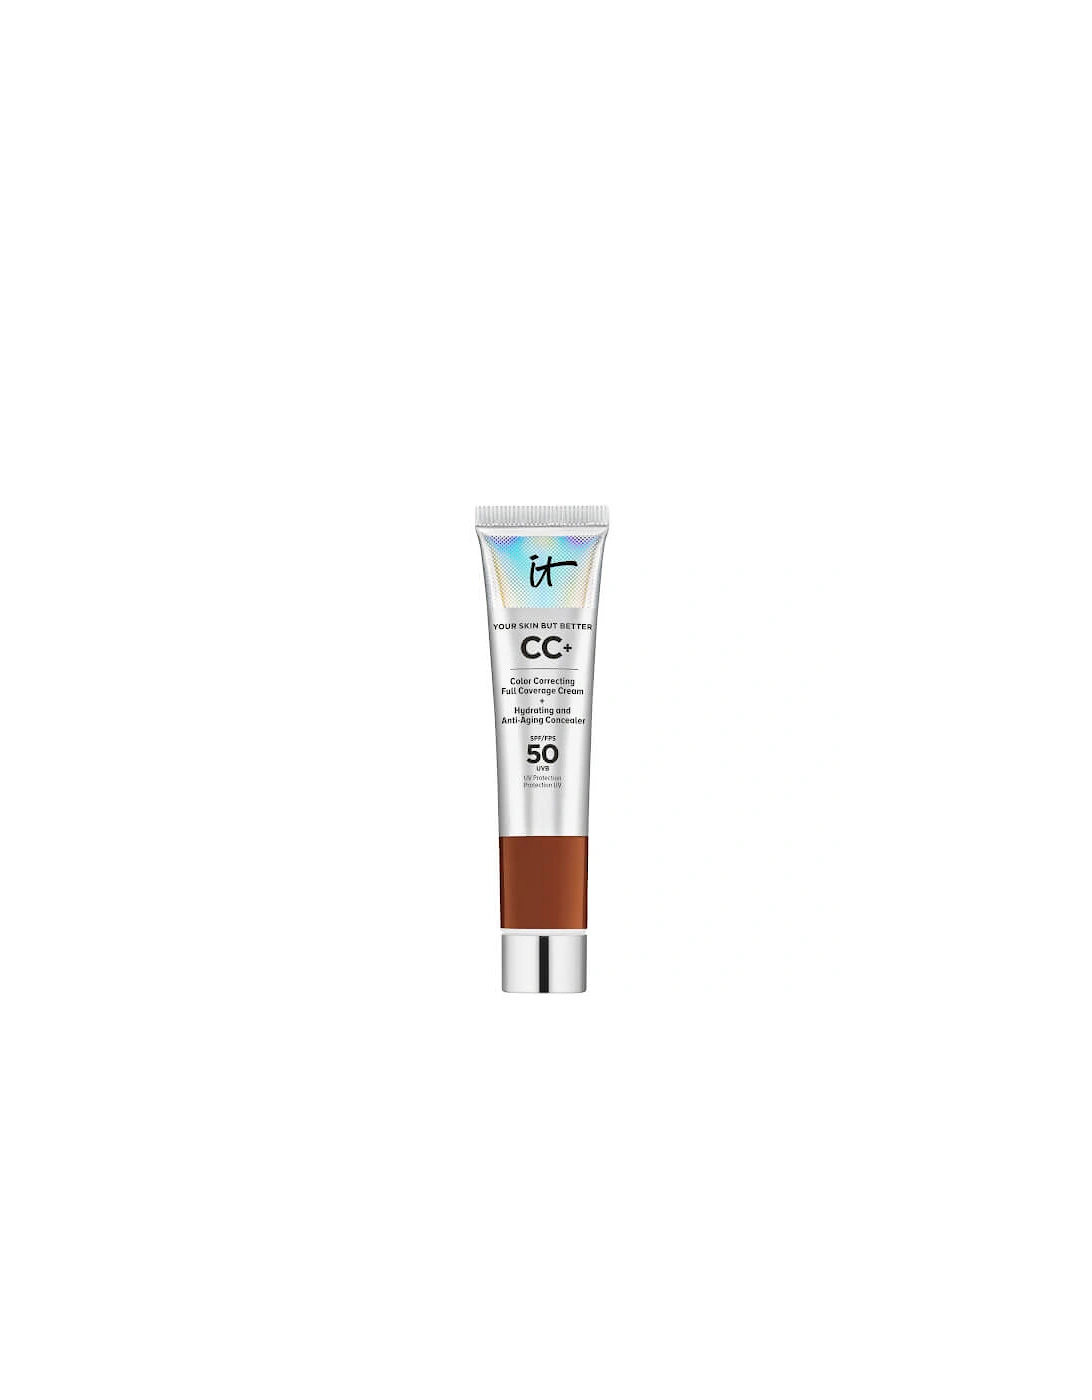 Your Skin But Better CC+ Cream with SPF50 - Deep, 2 of 1